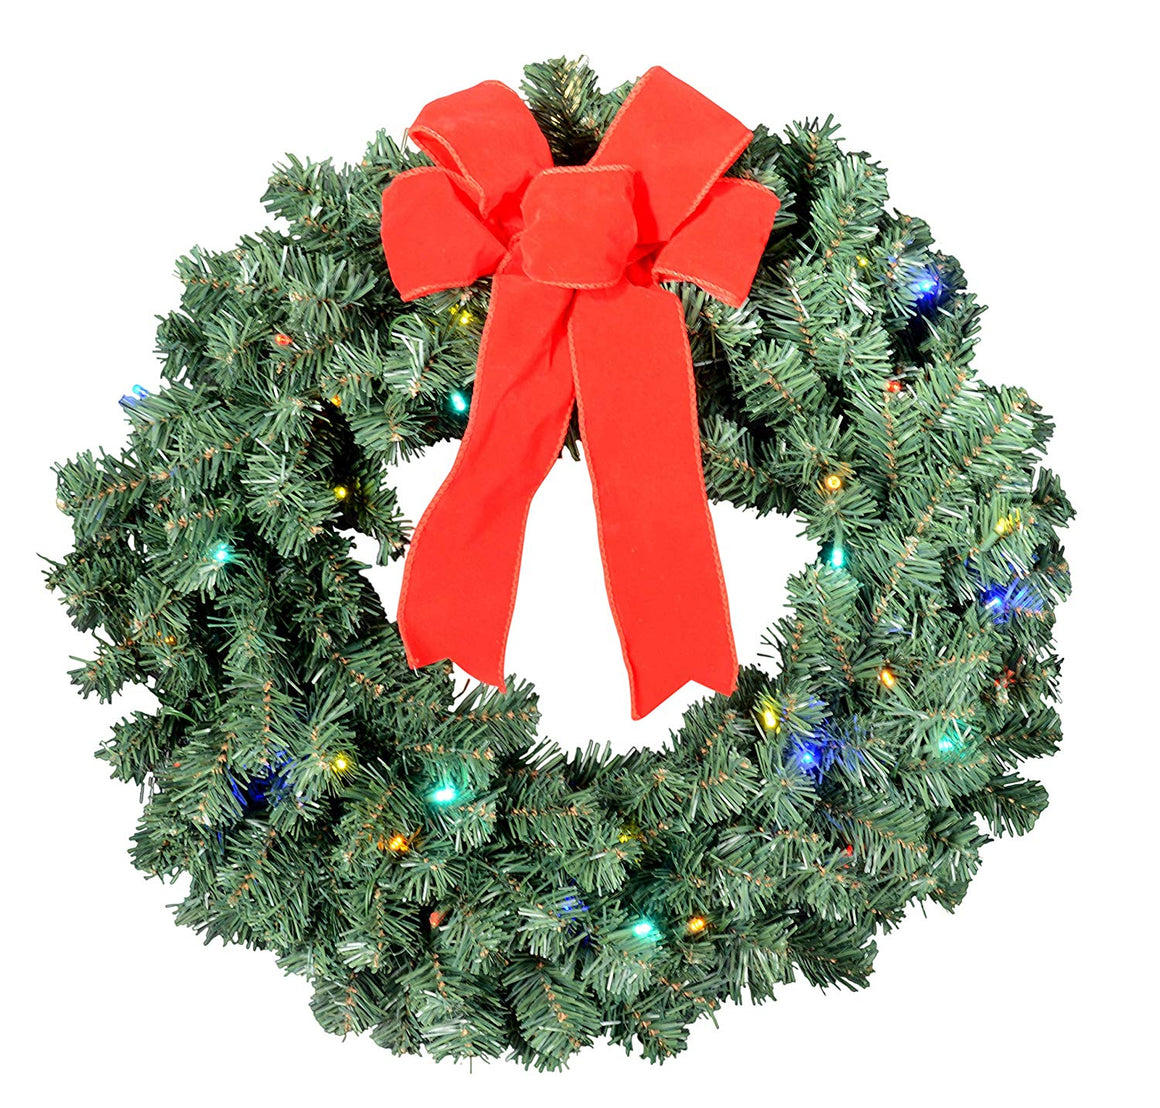 24 Inch Balsam Pine Christmas Wreath with 180 Tips and 36 Multi Colored LED Lights - Battery Operated with Timer